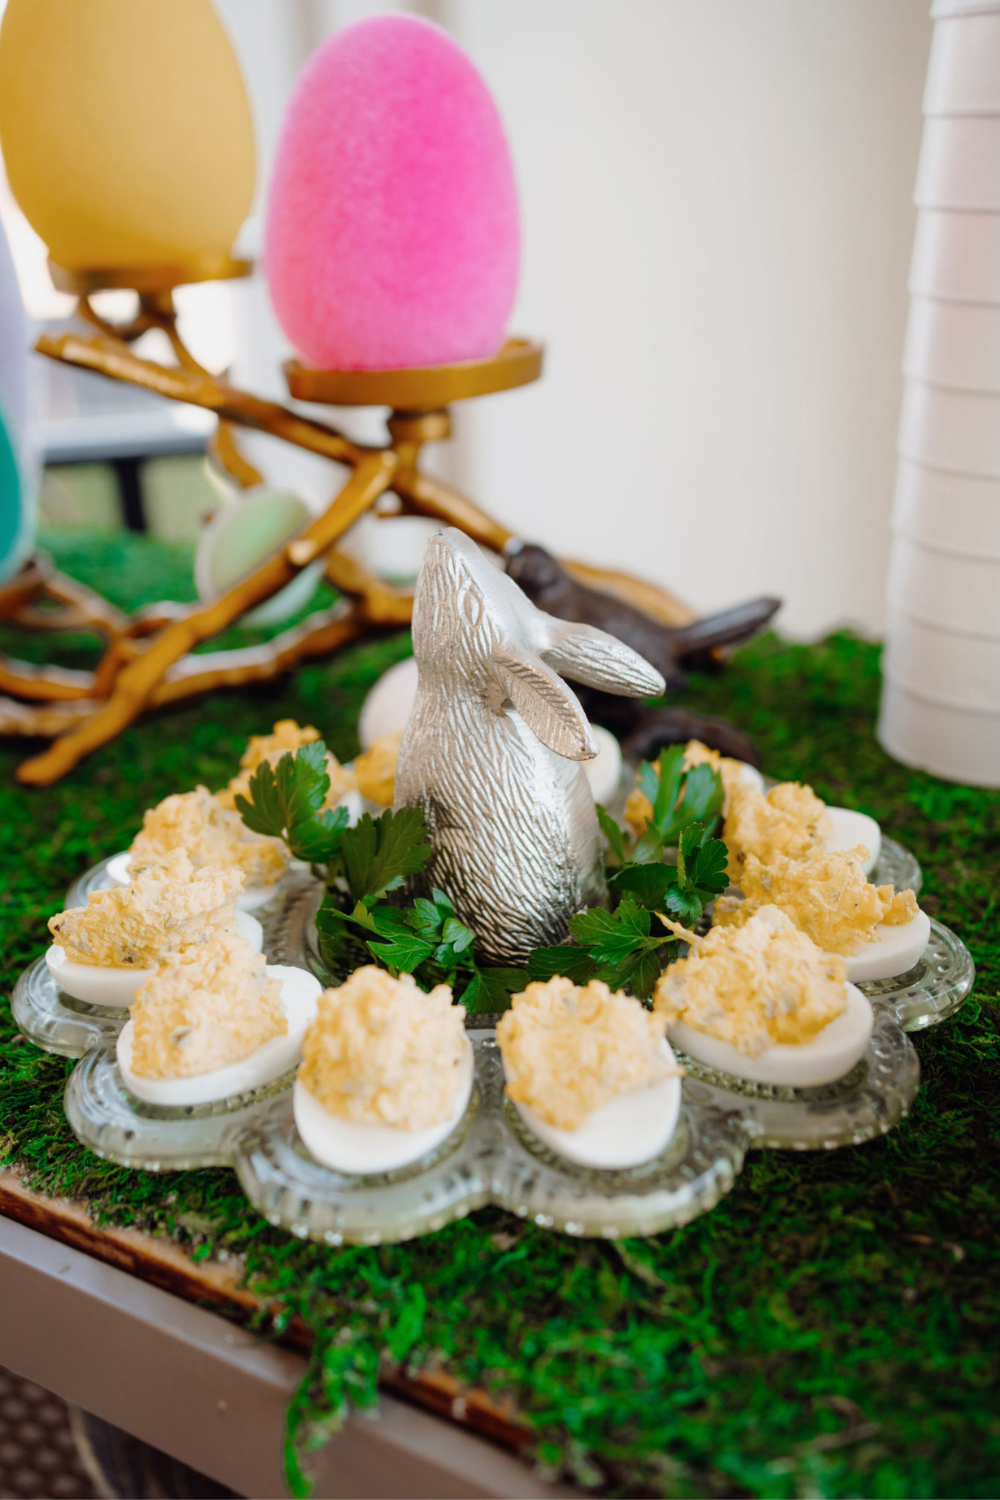 Deviled Eggs: The Perfect Spring Recipe

deviled eggs, eggs, appetizer, easter, spring, recipe, spring recipe, easter recipe, bunny tray, deviled egg tray, bunny, bunny tray